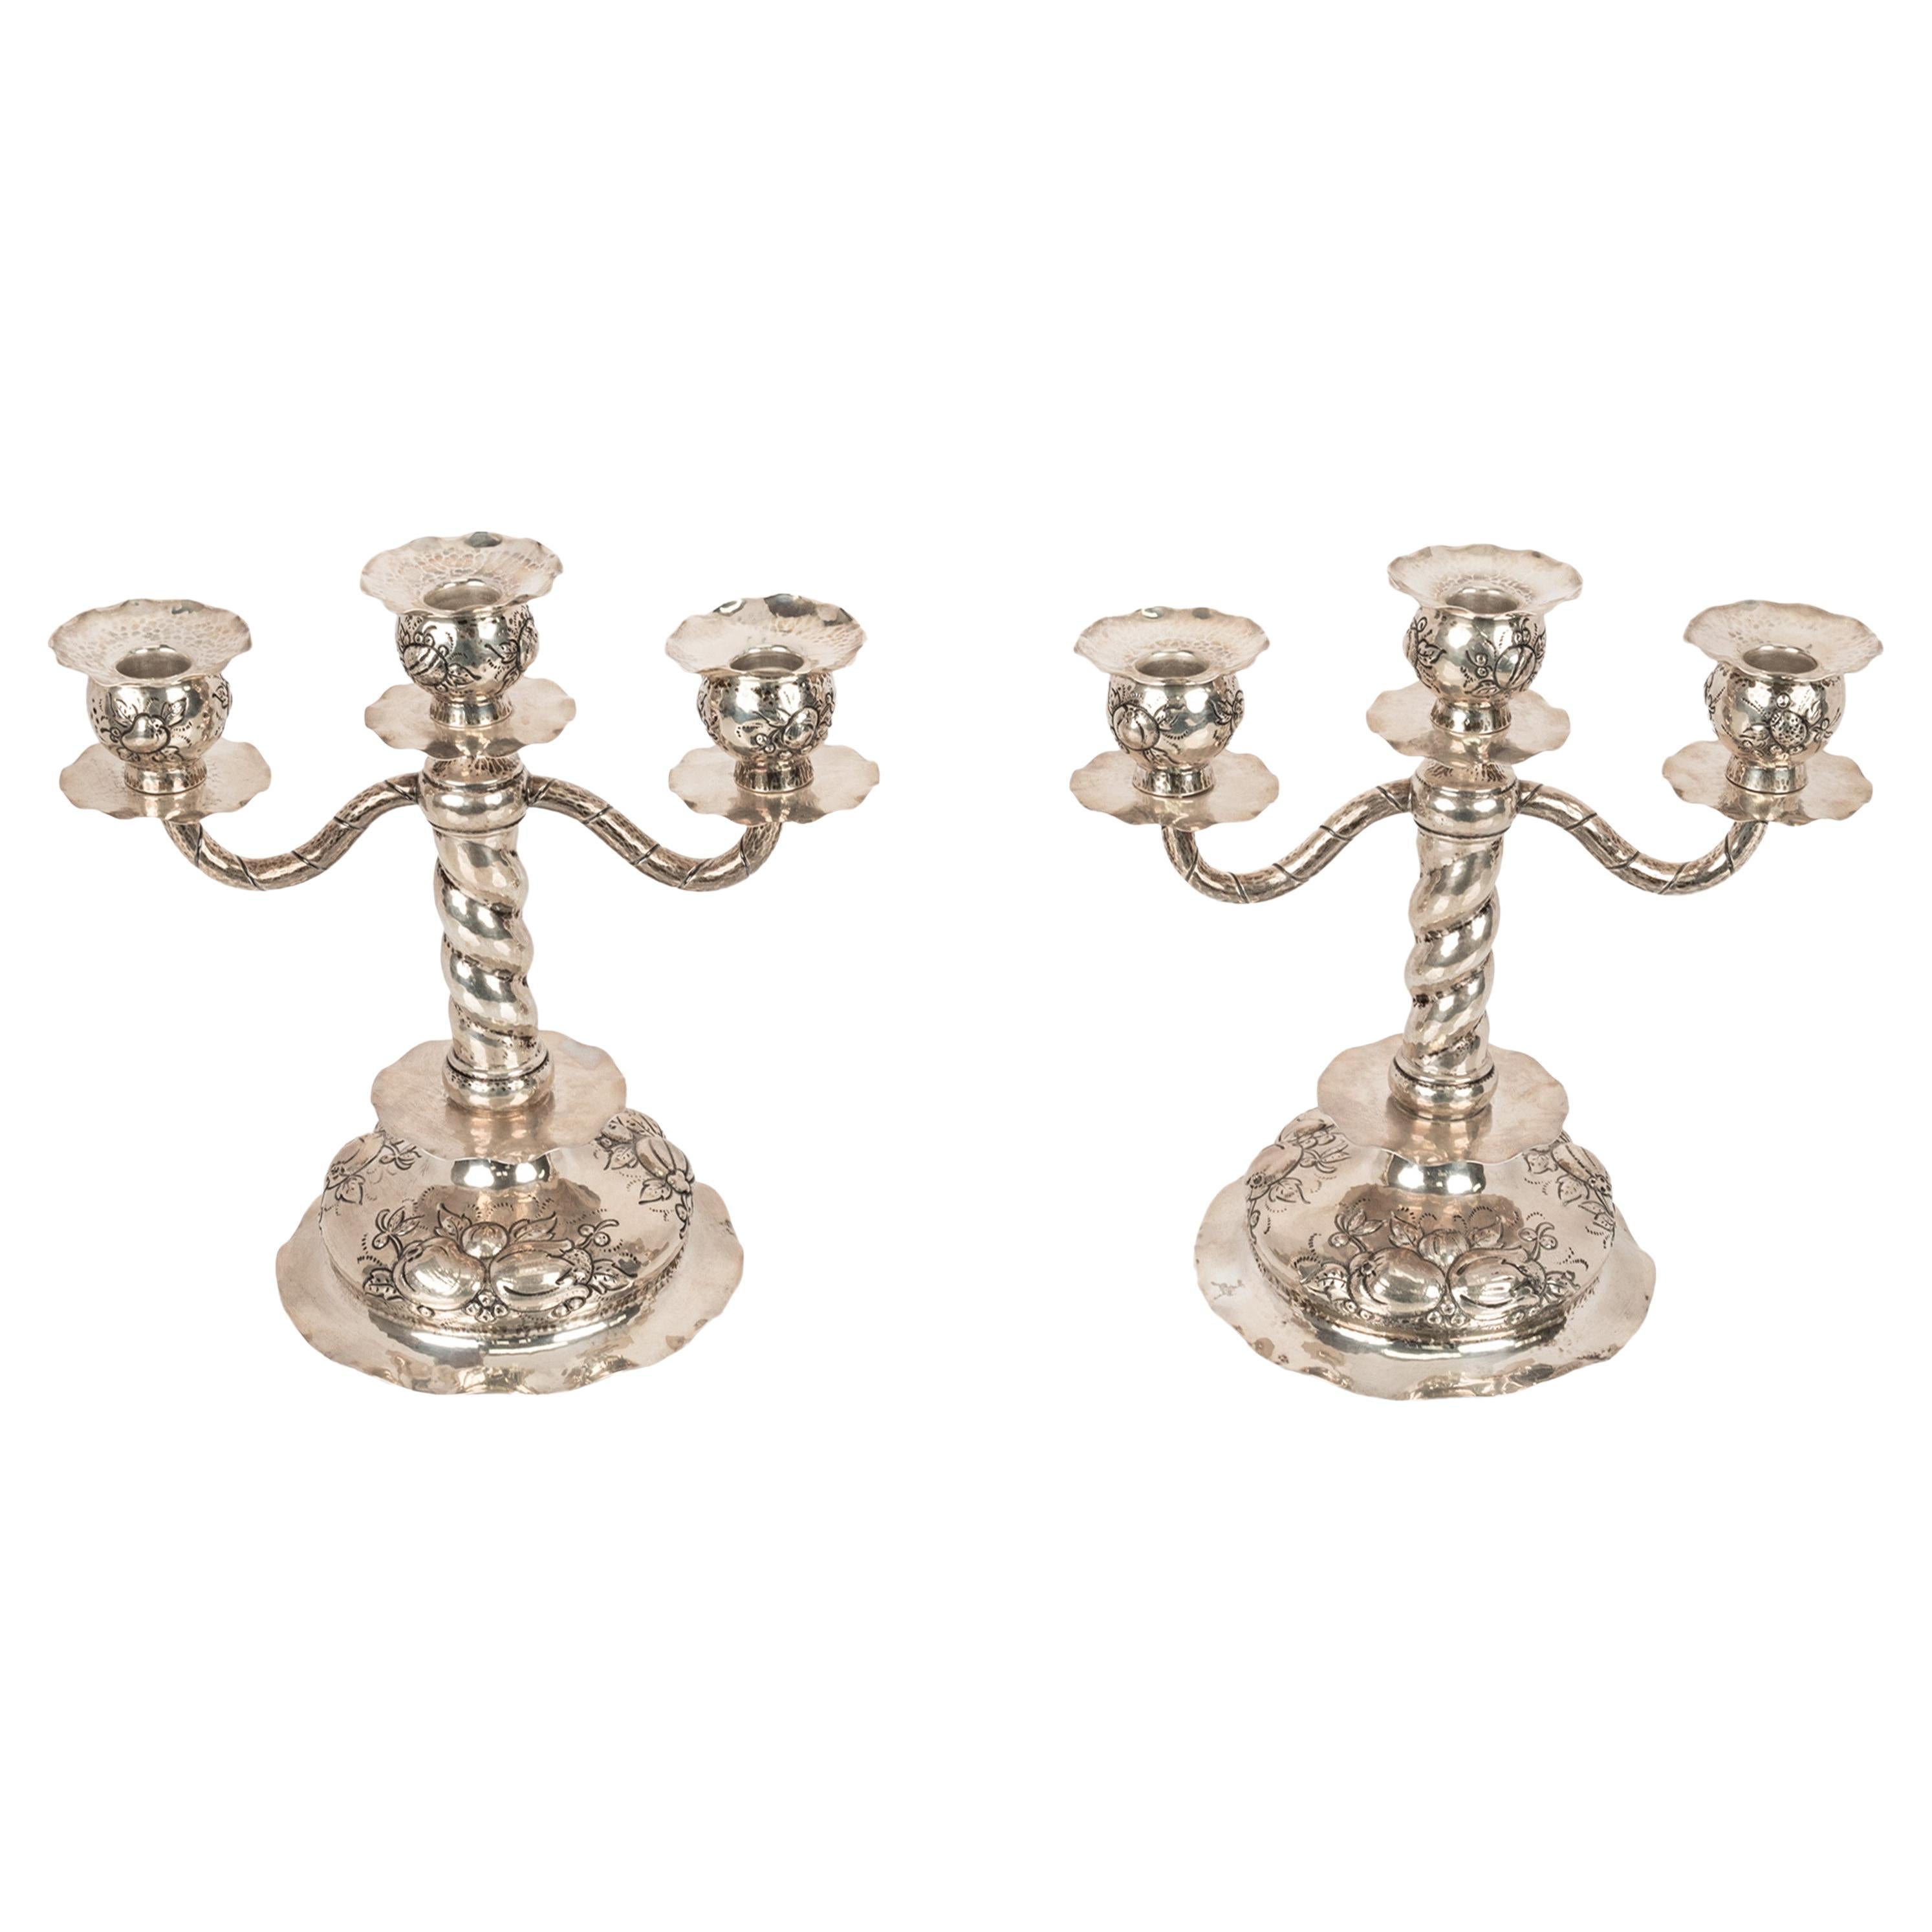 Pair Art Deco Swedish Silver 3 Branch Candelabras Candlesticks C.G.Hallberg 1927 In Good Condition For Sale In Portland, OR